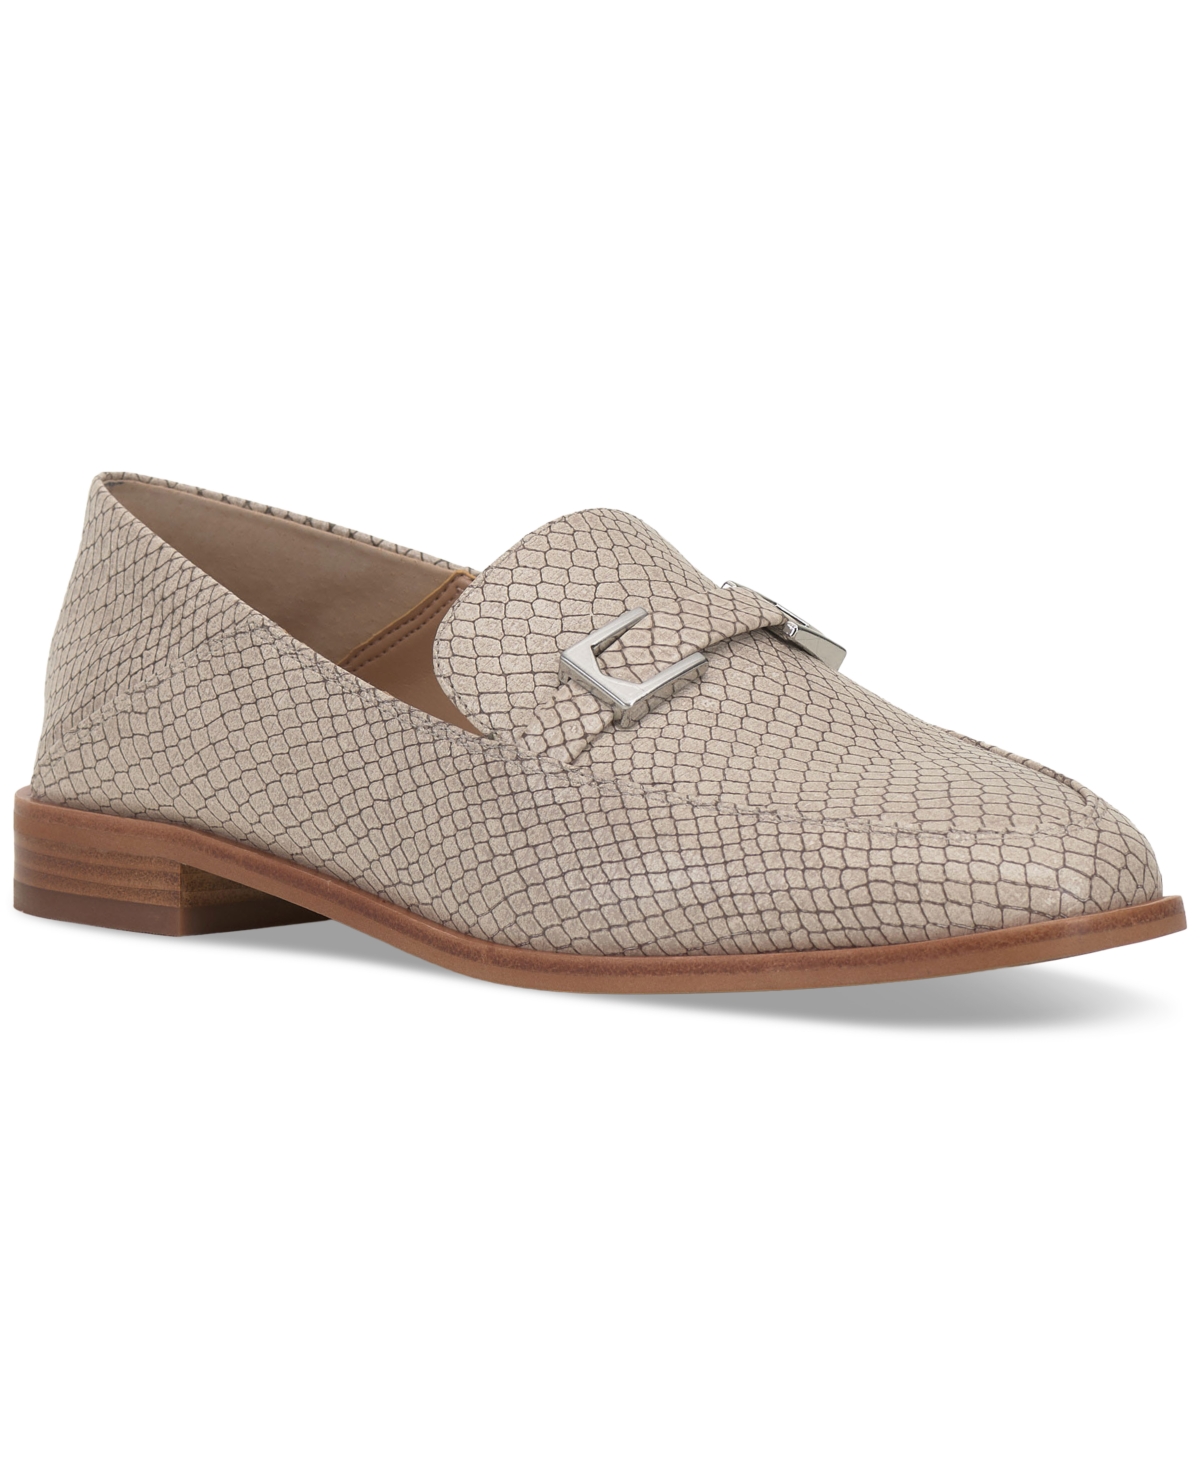 VINCE CAMUTO WOMEN'S CAKELLA TAILORED LOAFER FLATS